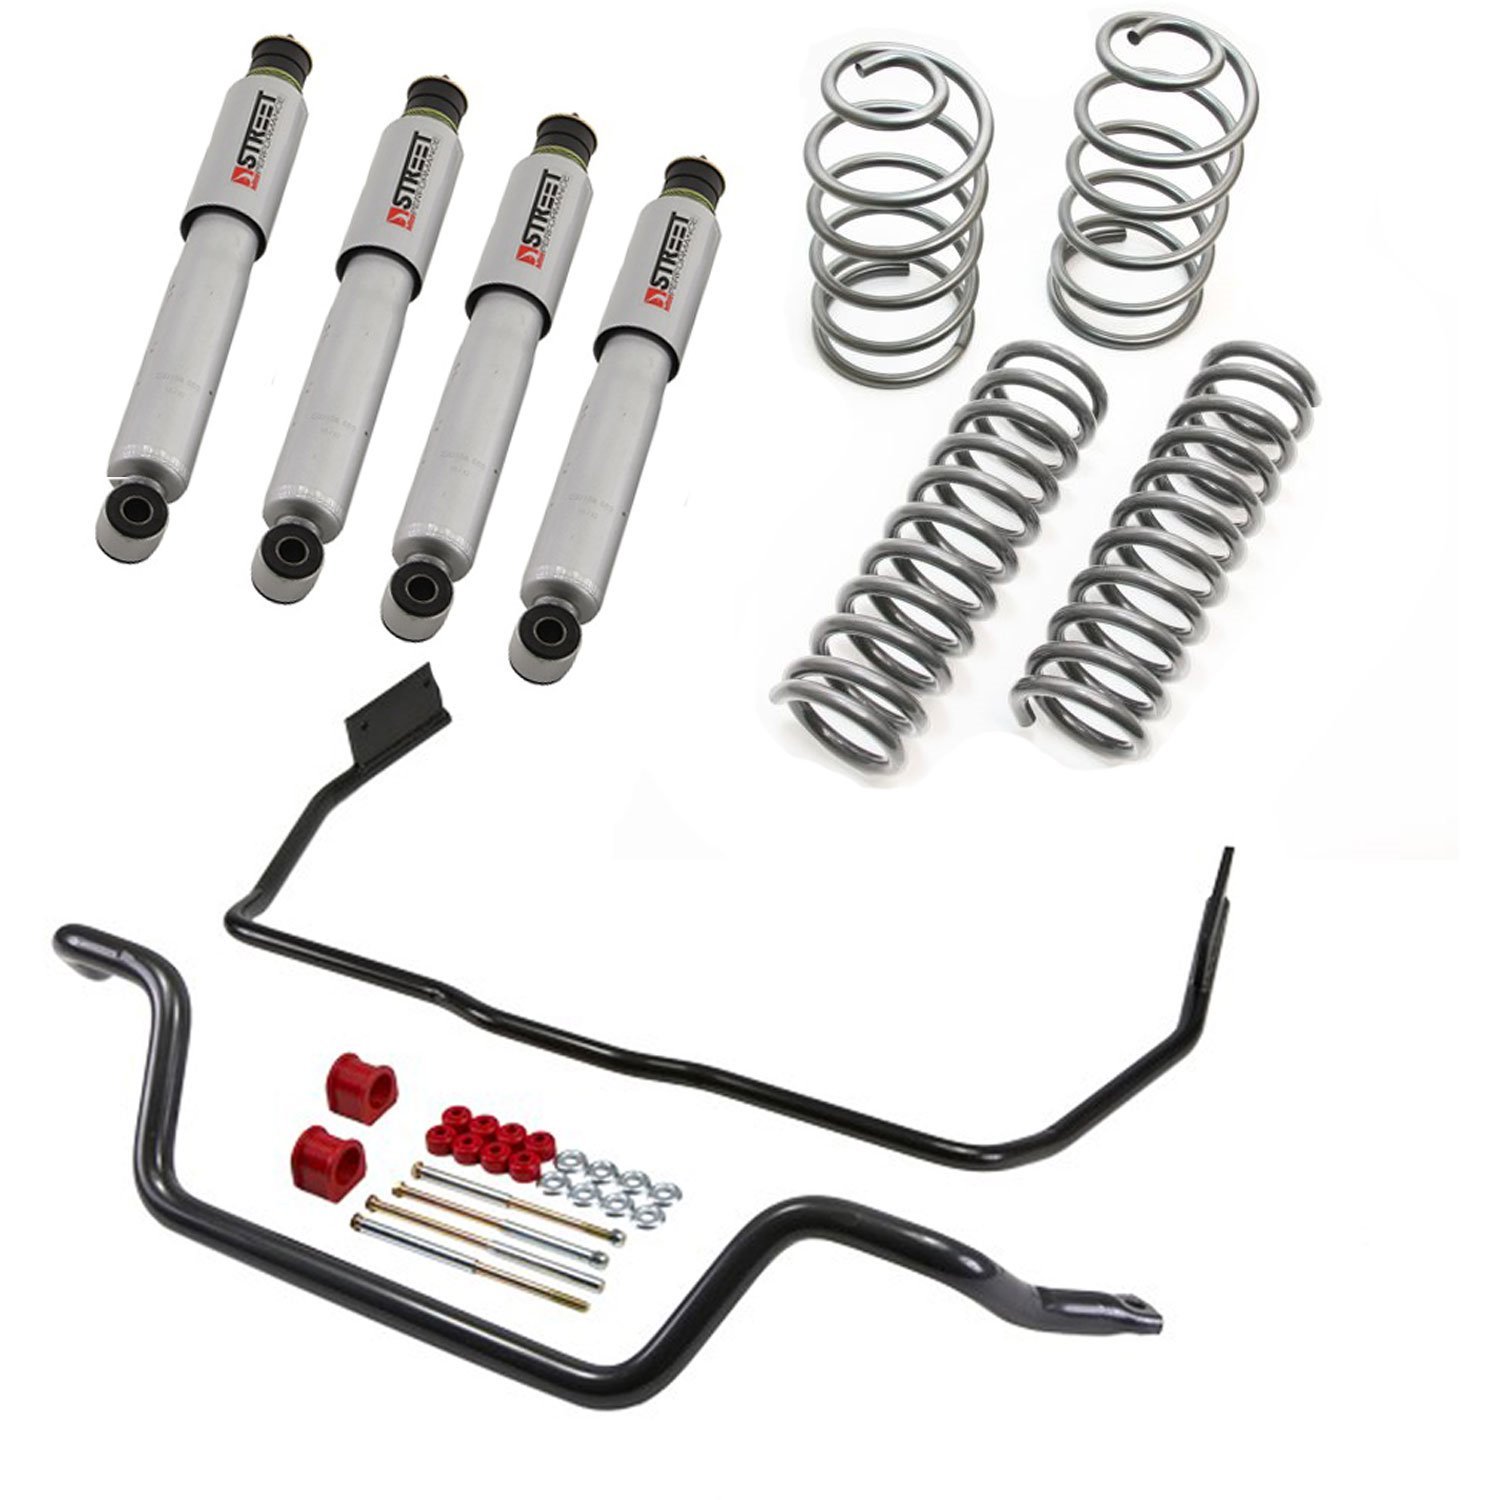 Muscle Car Suspension Kit for 1979-1993 Ford Mustang